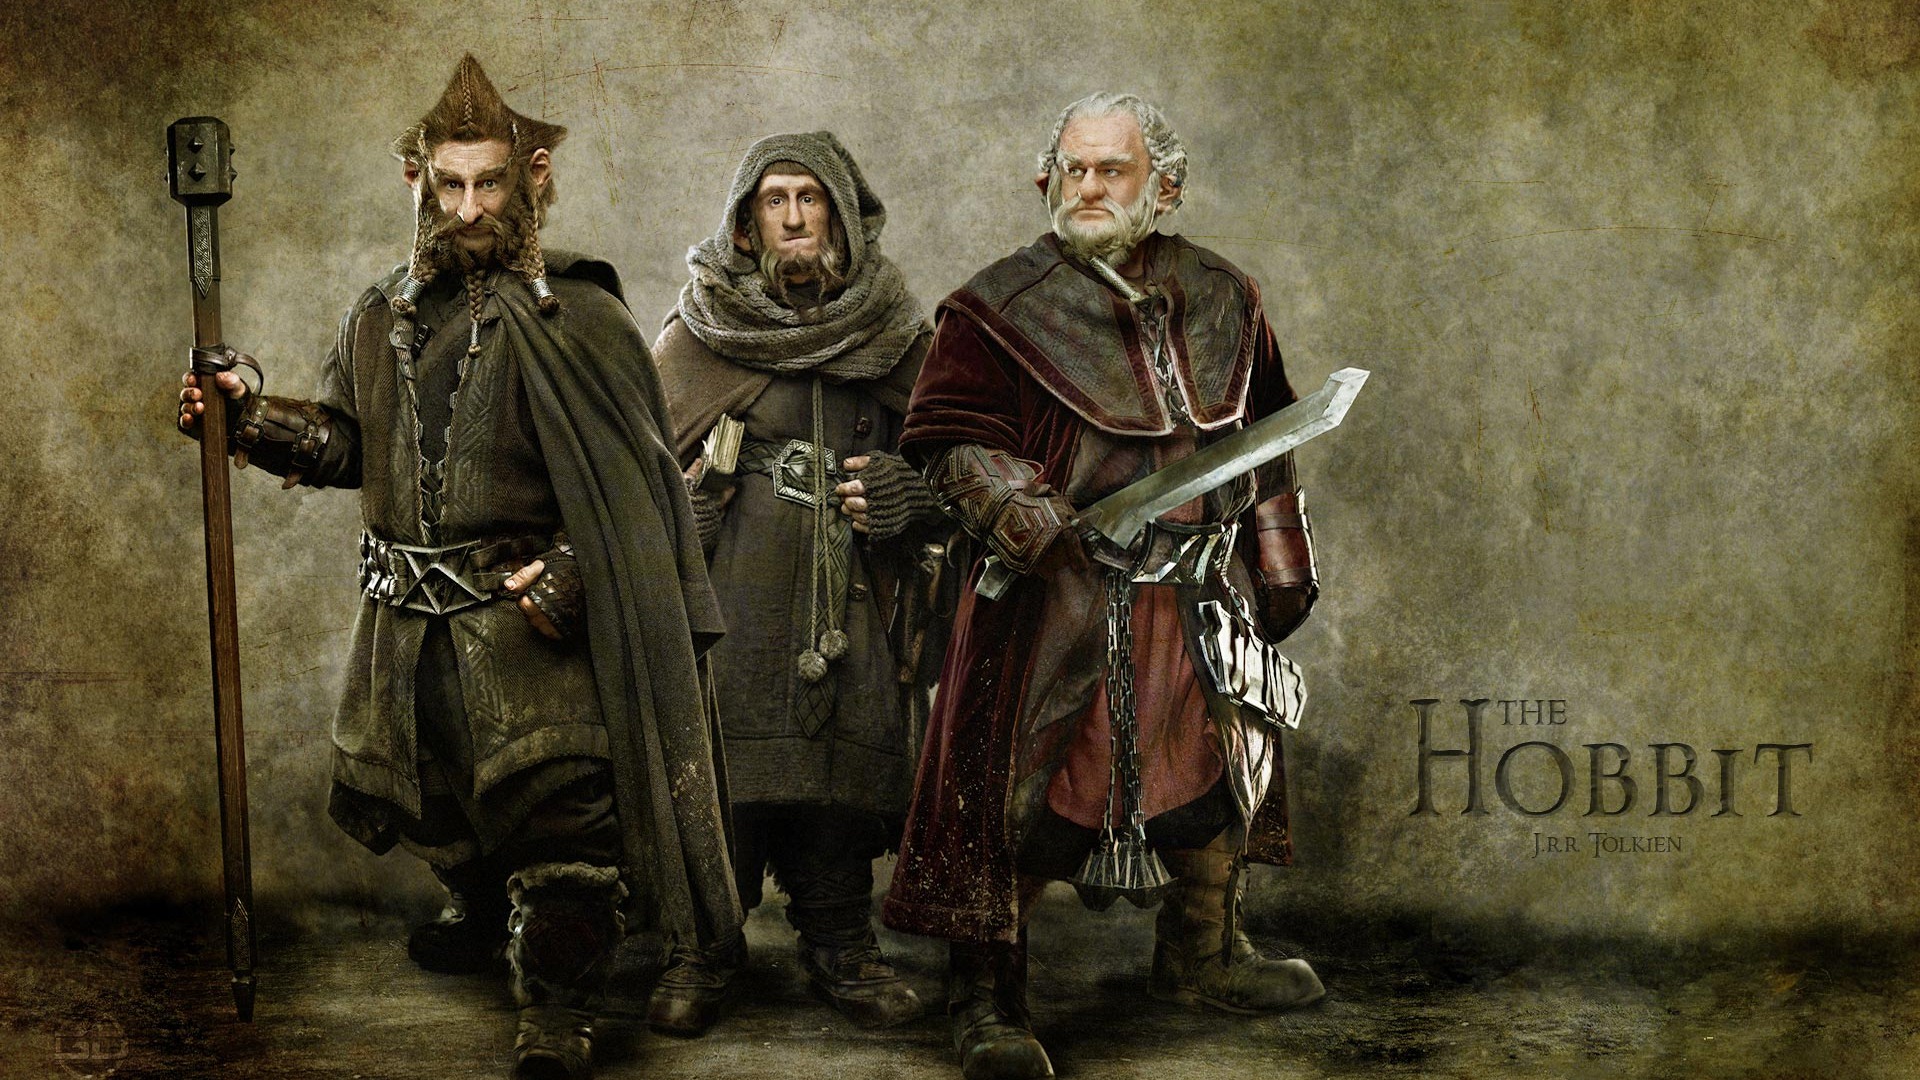 The Hobbit: An Unexpected Journey HD wallpapers #7 - 1920x1080